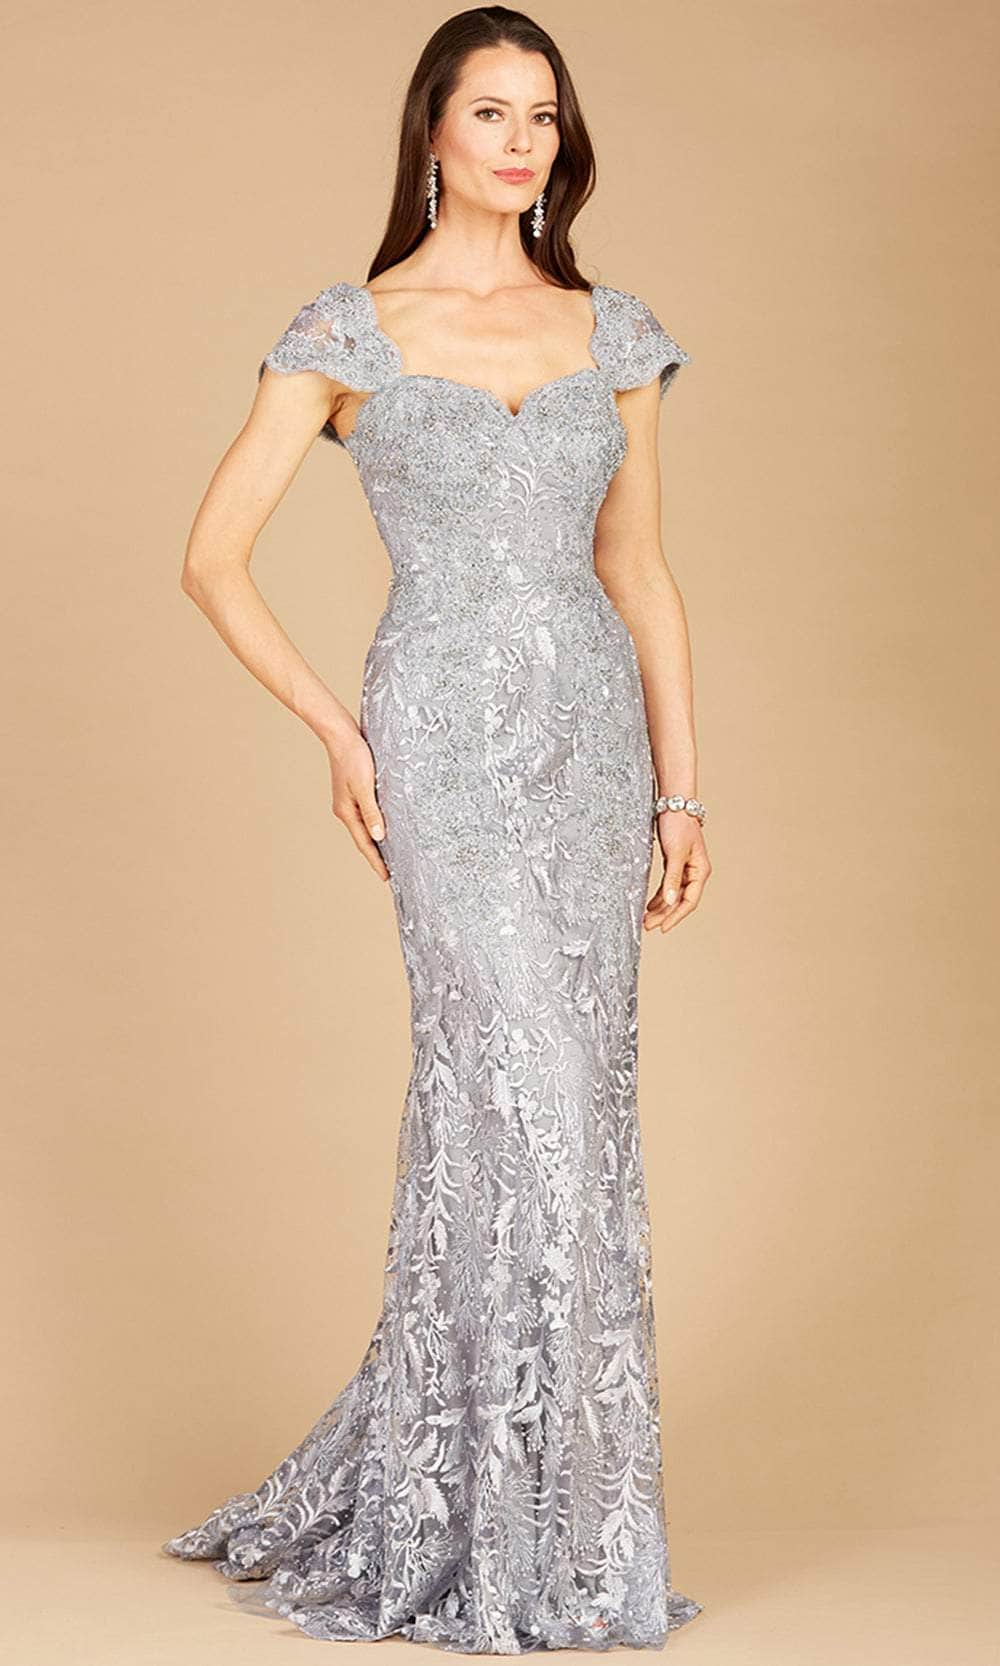 Lara Dresses 29295 - Embroidered Cap Sleeved Gown Special Occasion Dress 4 / Slate